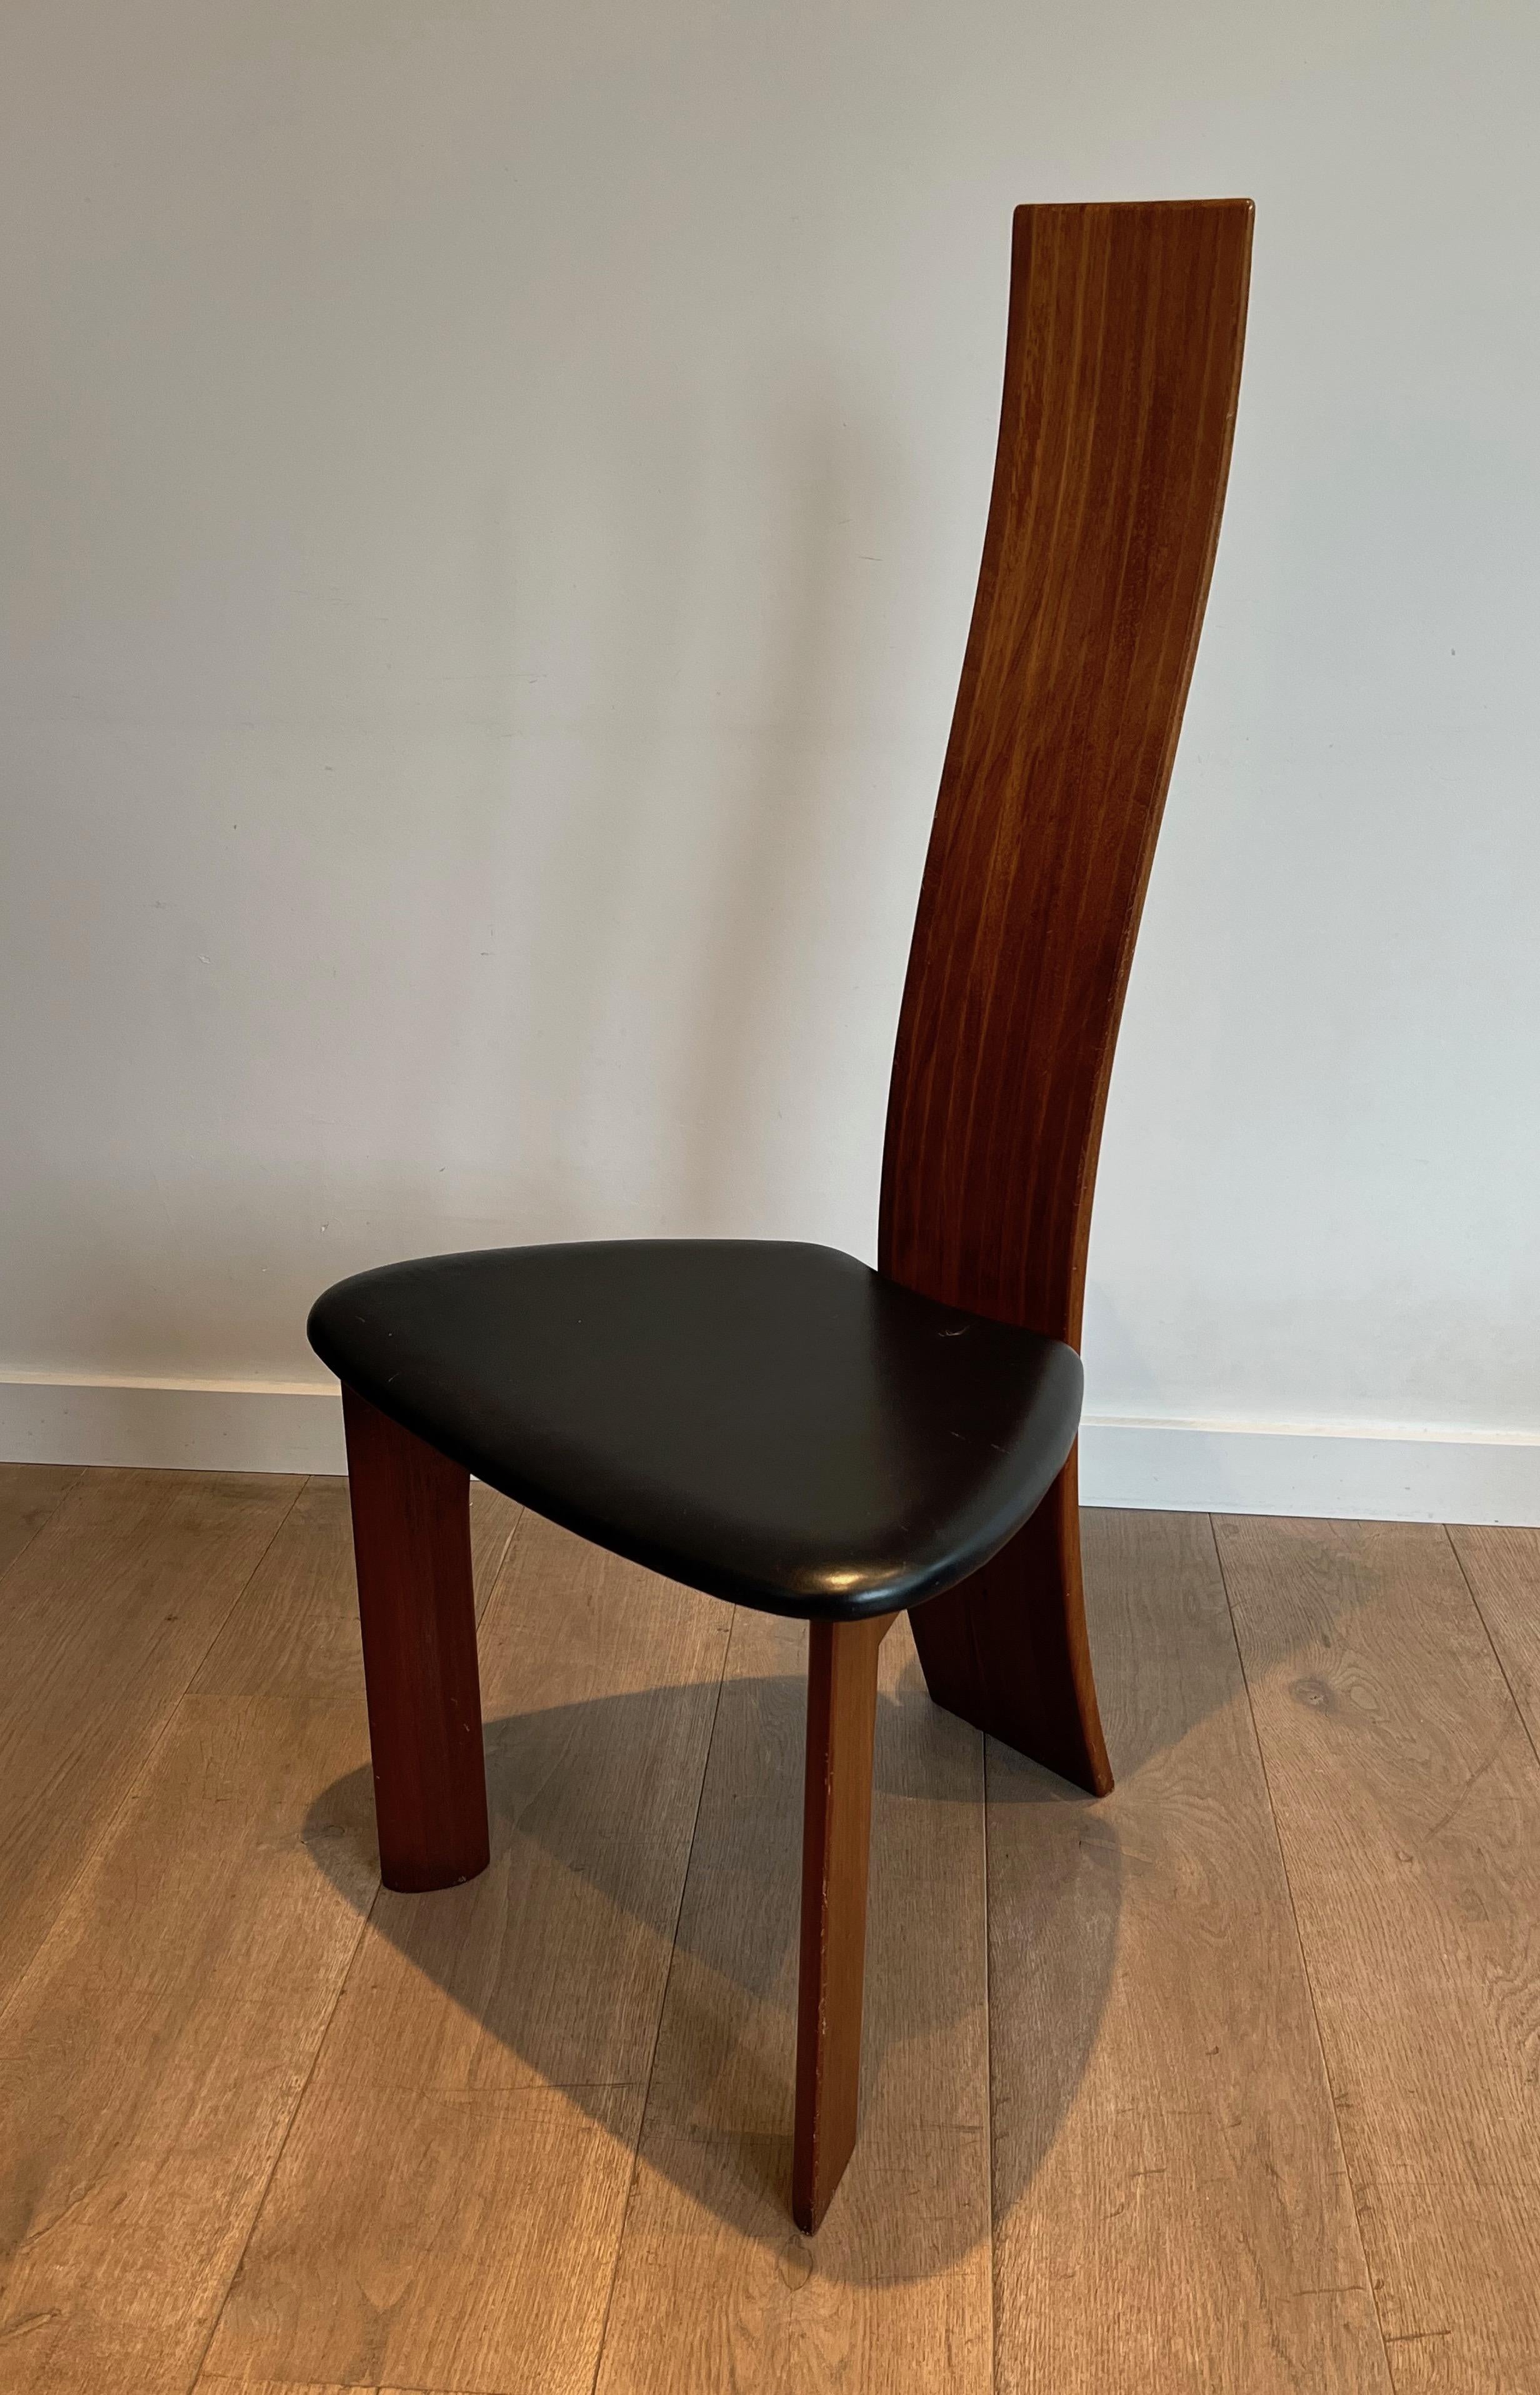 Pair of Exotic Wood and Black Leather Chairs, Scandinavian Work. Circa 1970 For Sale 3